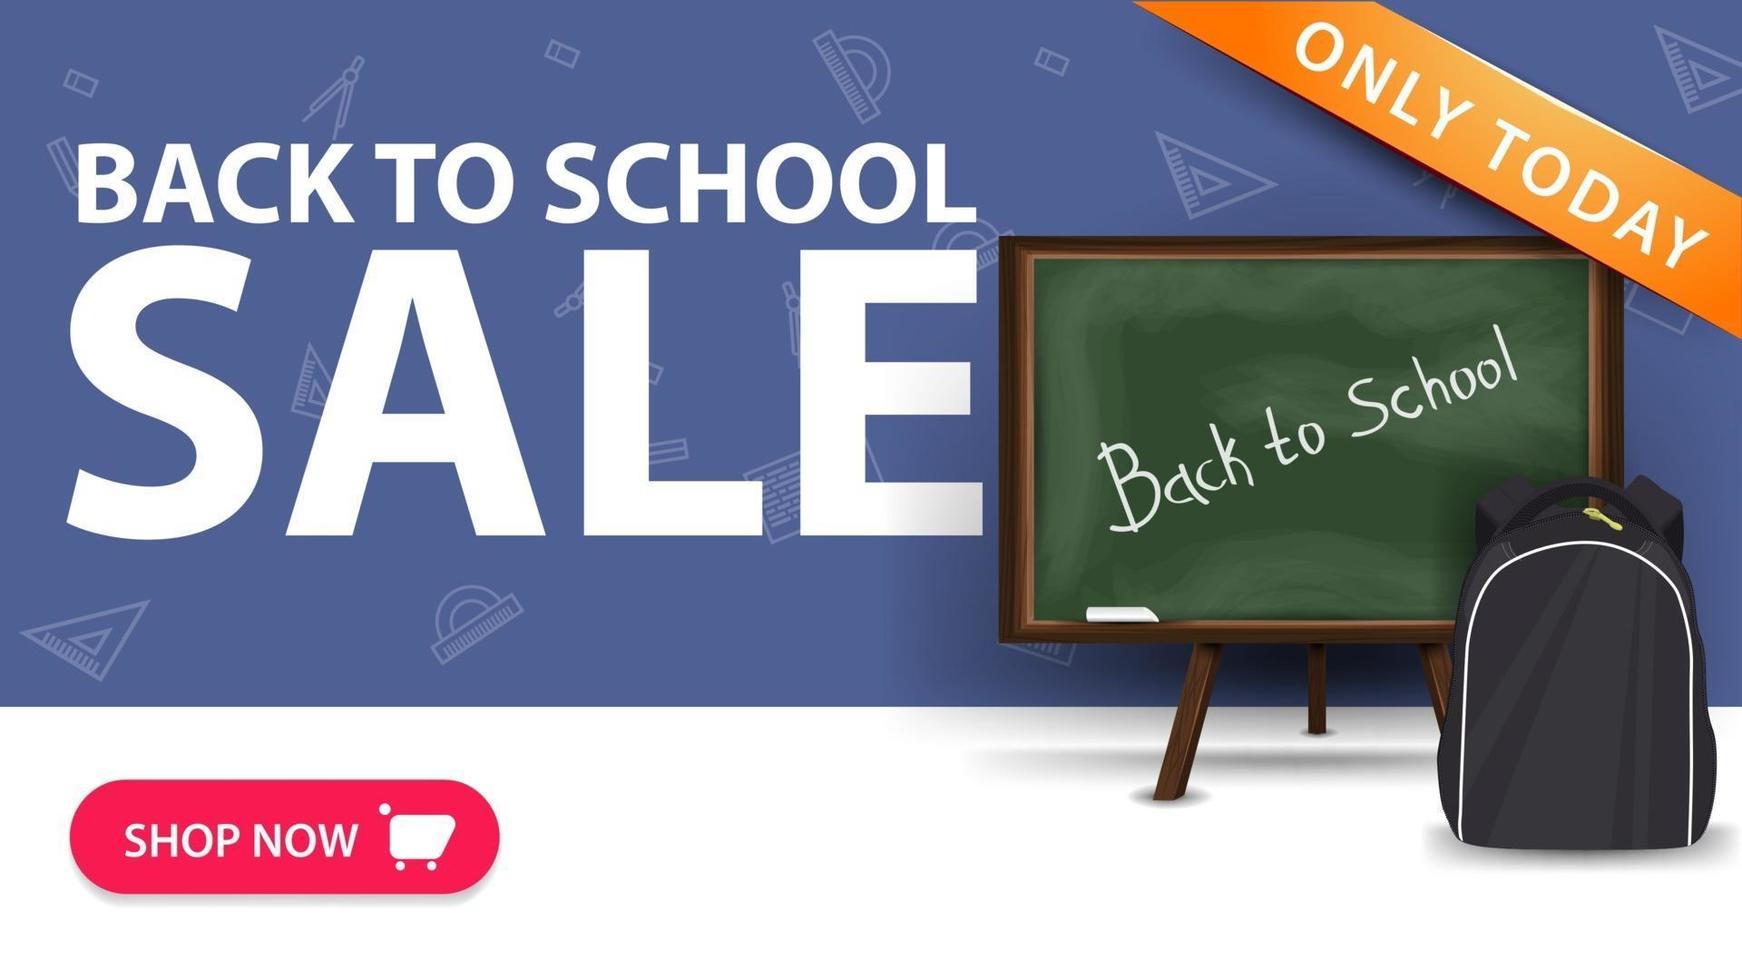 Back to school sale, modern discount banner with button vector